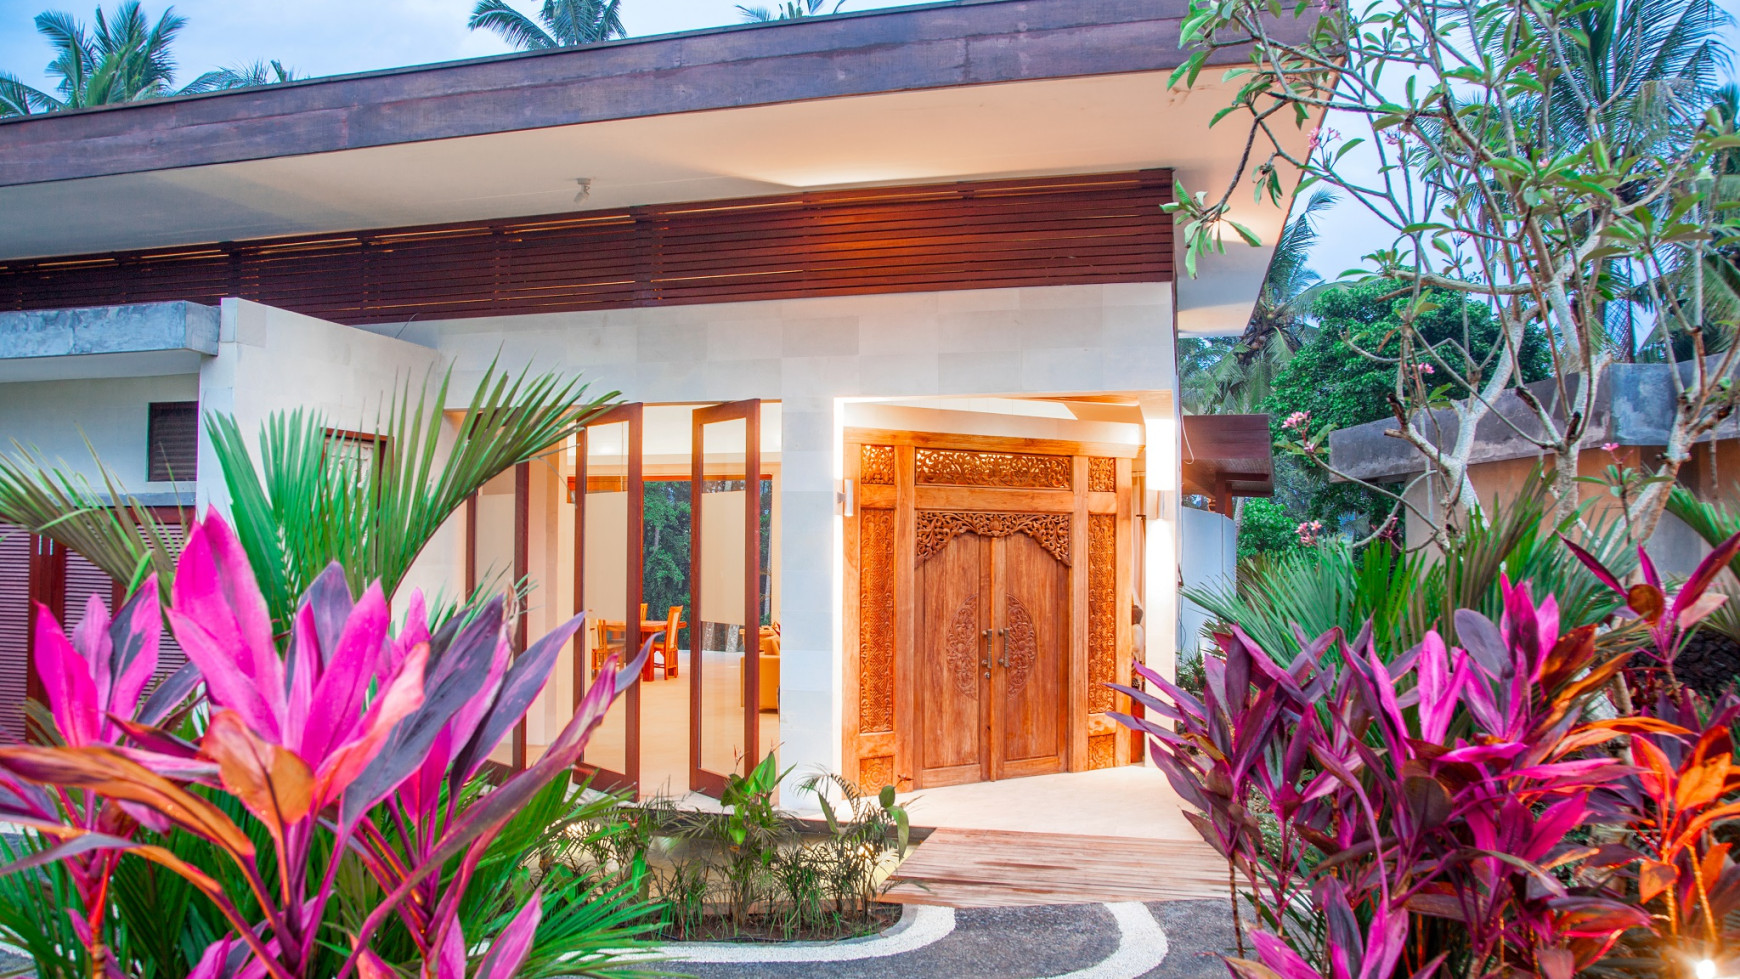 Amazing 3 Bedroom Villa on 1200 sq m of Leasehold Land with Ravine View 10 Minutes from Ubud Center